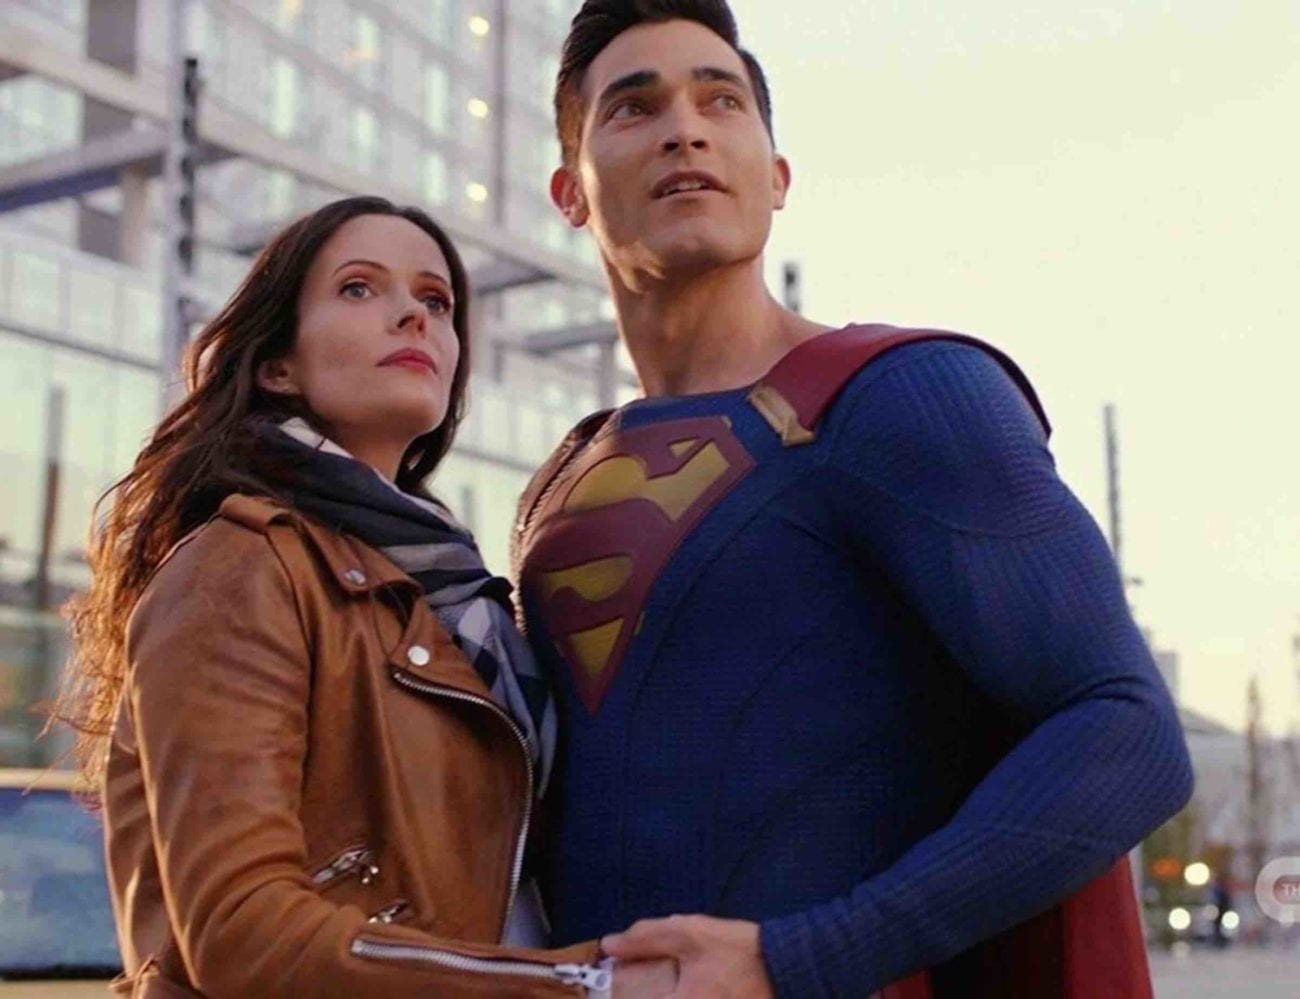 Now that 'Superman & Lois' is officially coming to The CW in the near future, let’s dish out everything we know so far about them joining the Arrowverse.